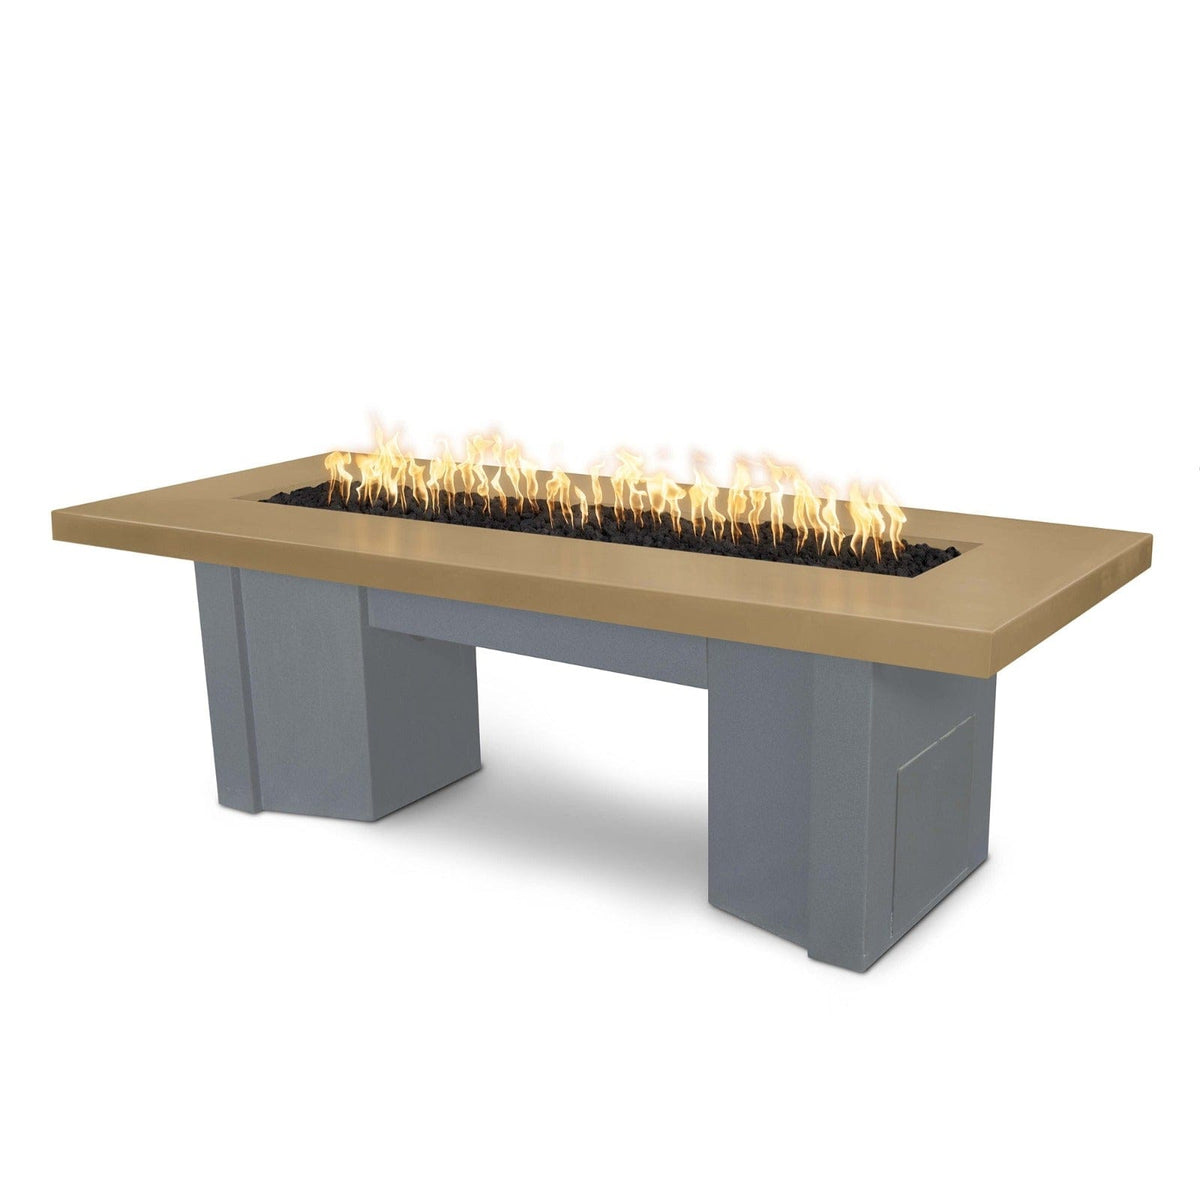 The Outdoor Plus Fire Features Brown (-BRN) / Gray Powder Coated Steel (-GRY) The Outdoor Plus 78&quot; Alameda Fire Table Smooth Concrete in Liquid Propane - Match Lit / OPT-ALMGFRC78-LP